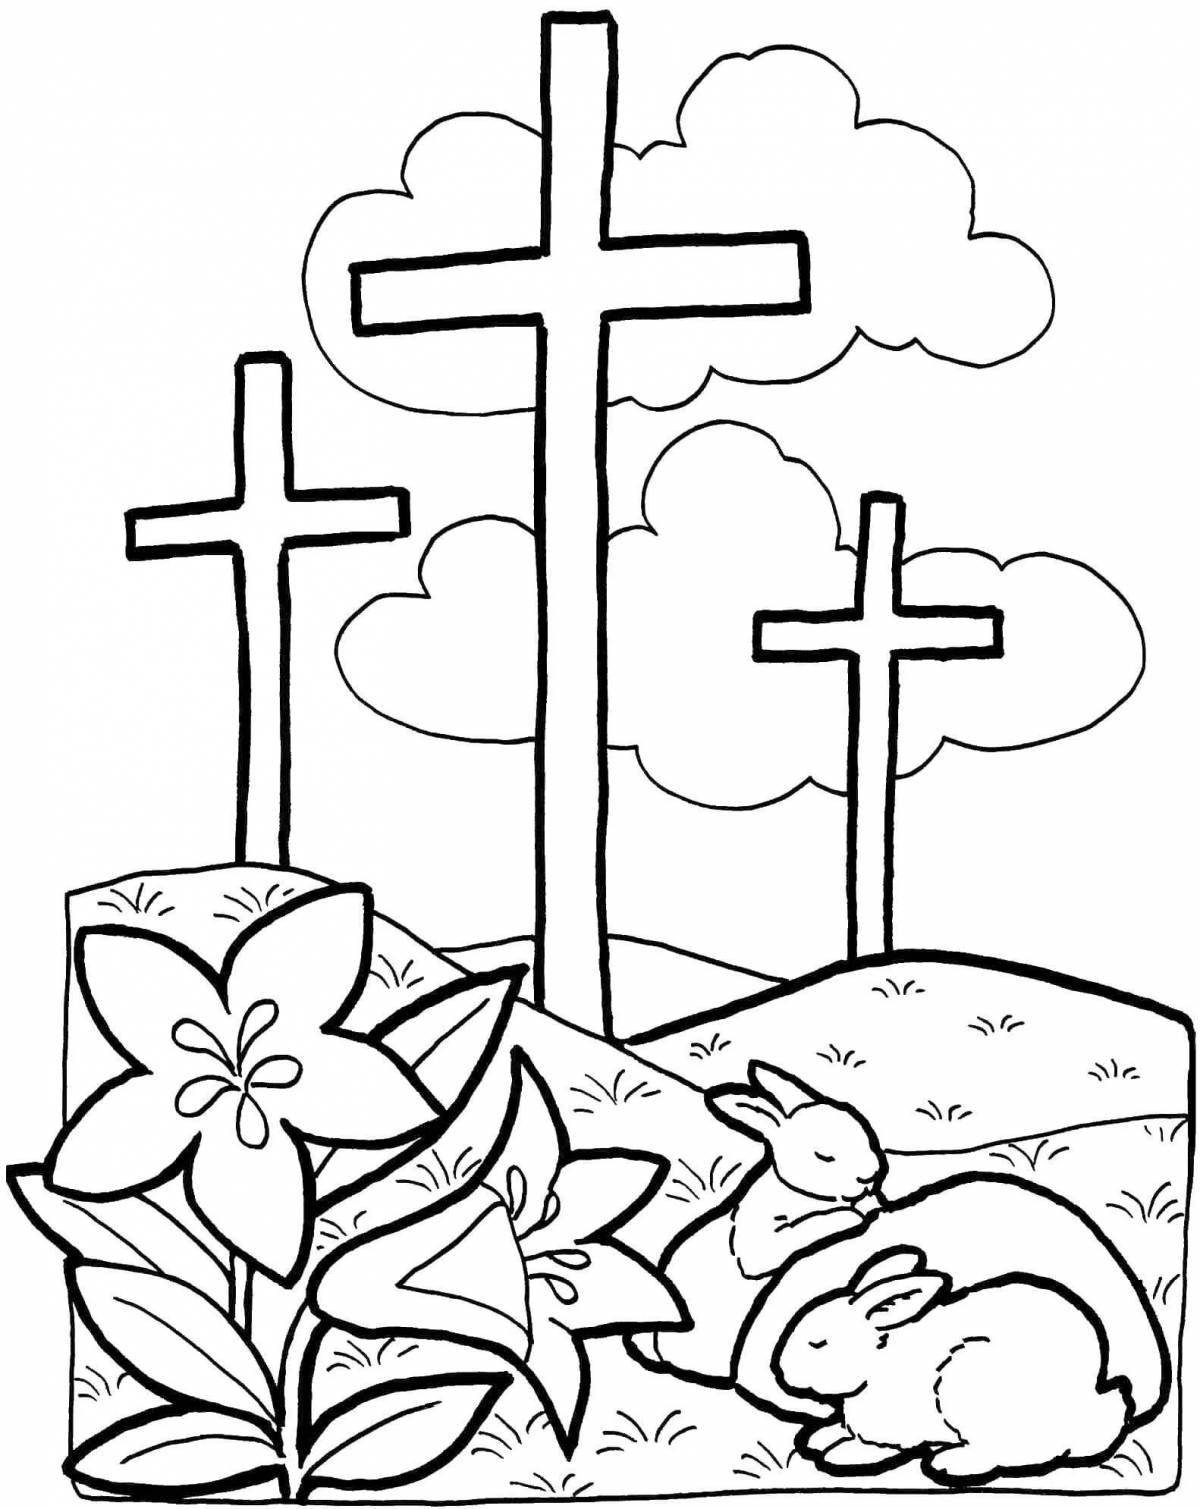 Glorious orthodox coloring book for kids